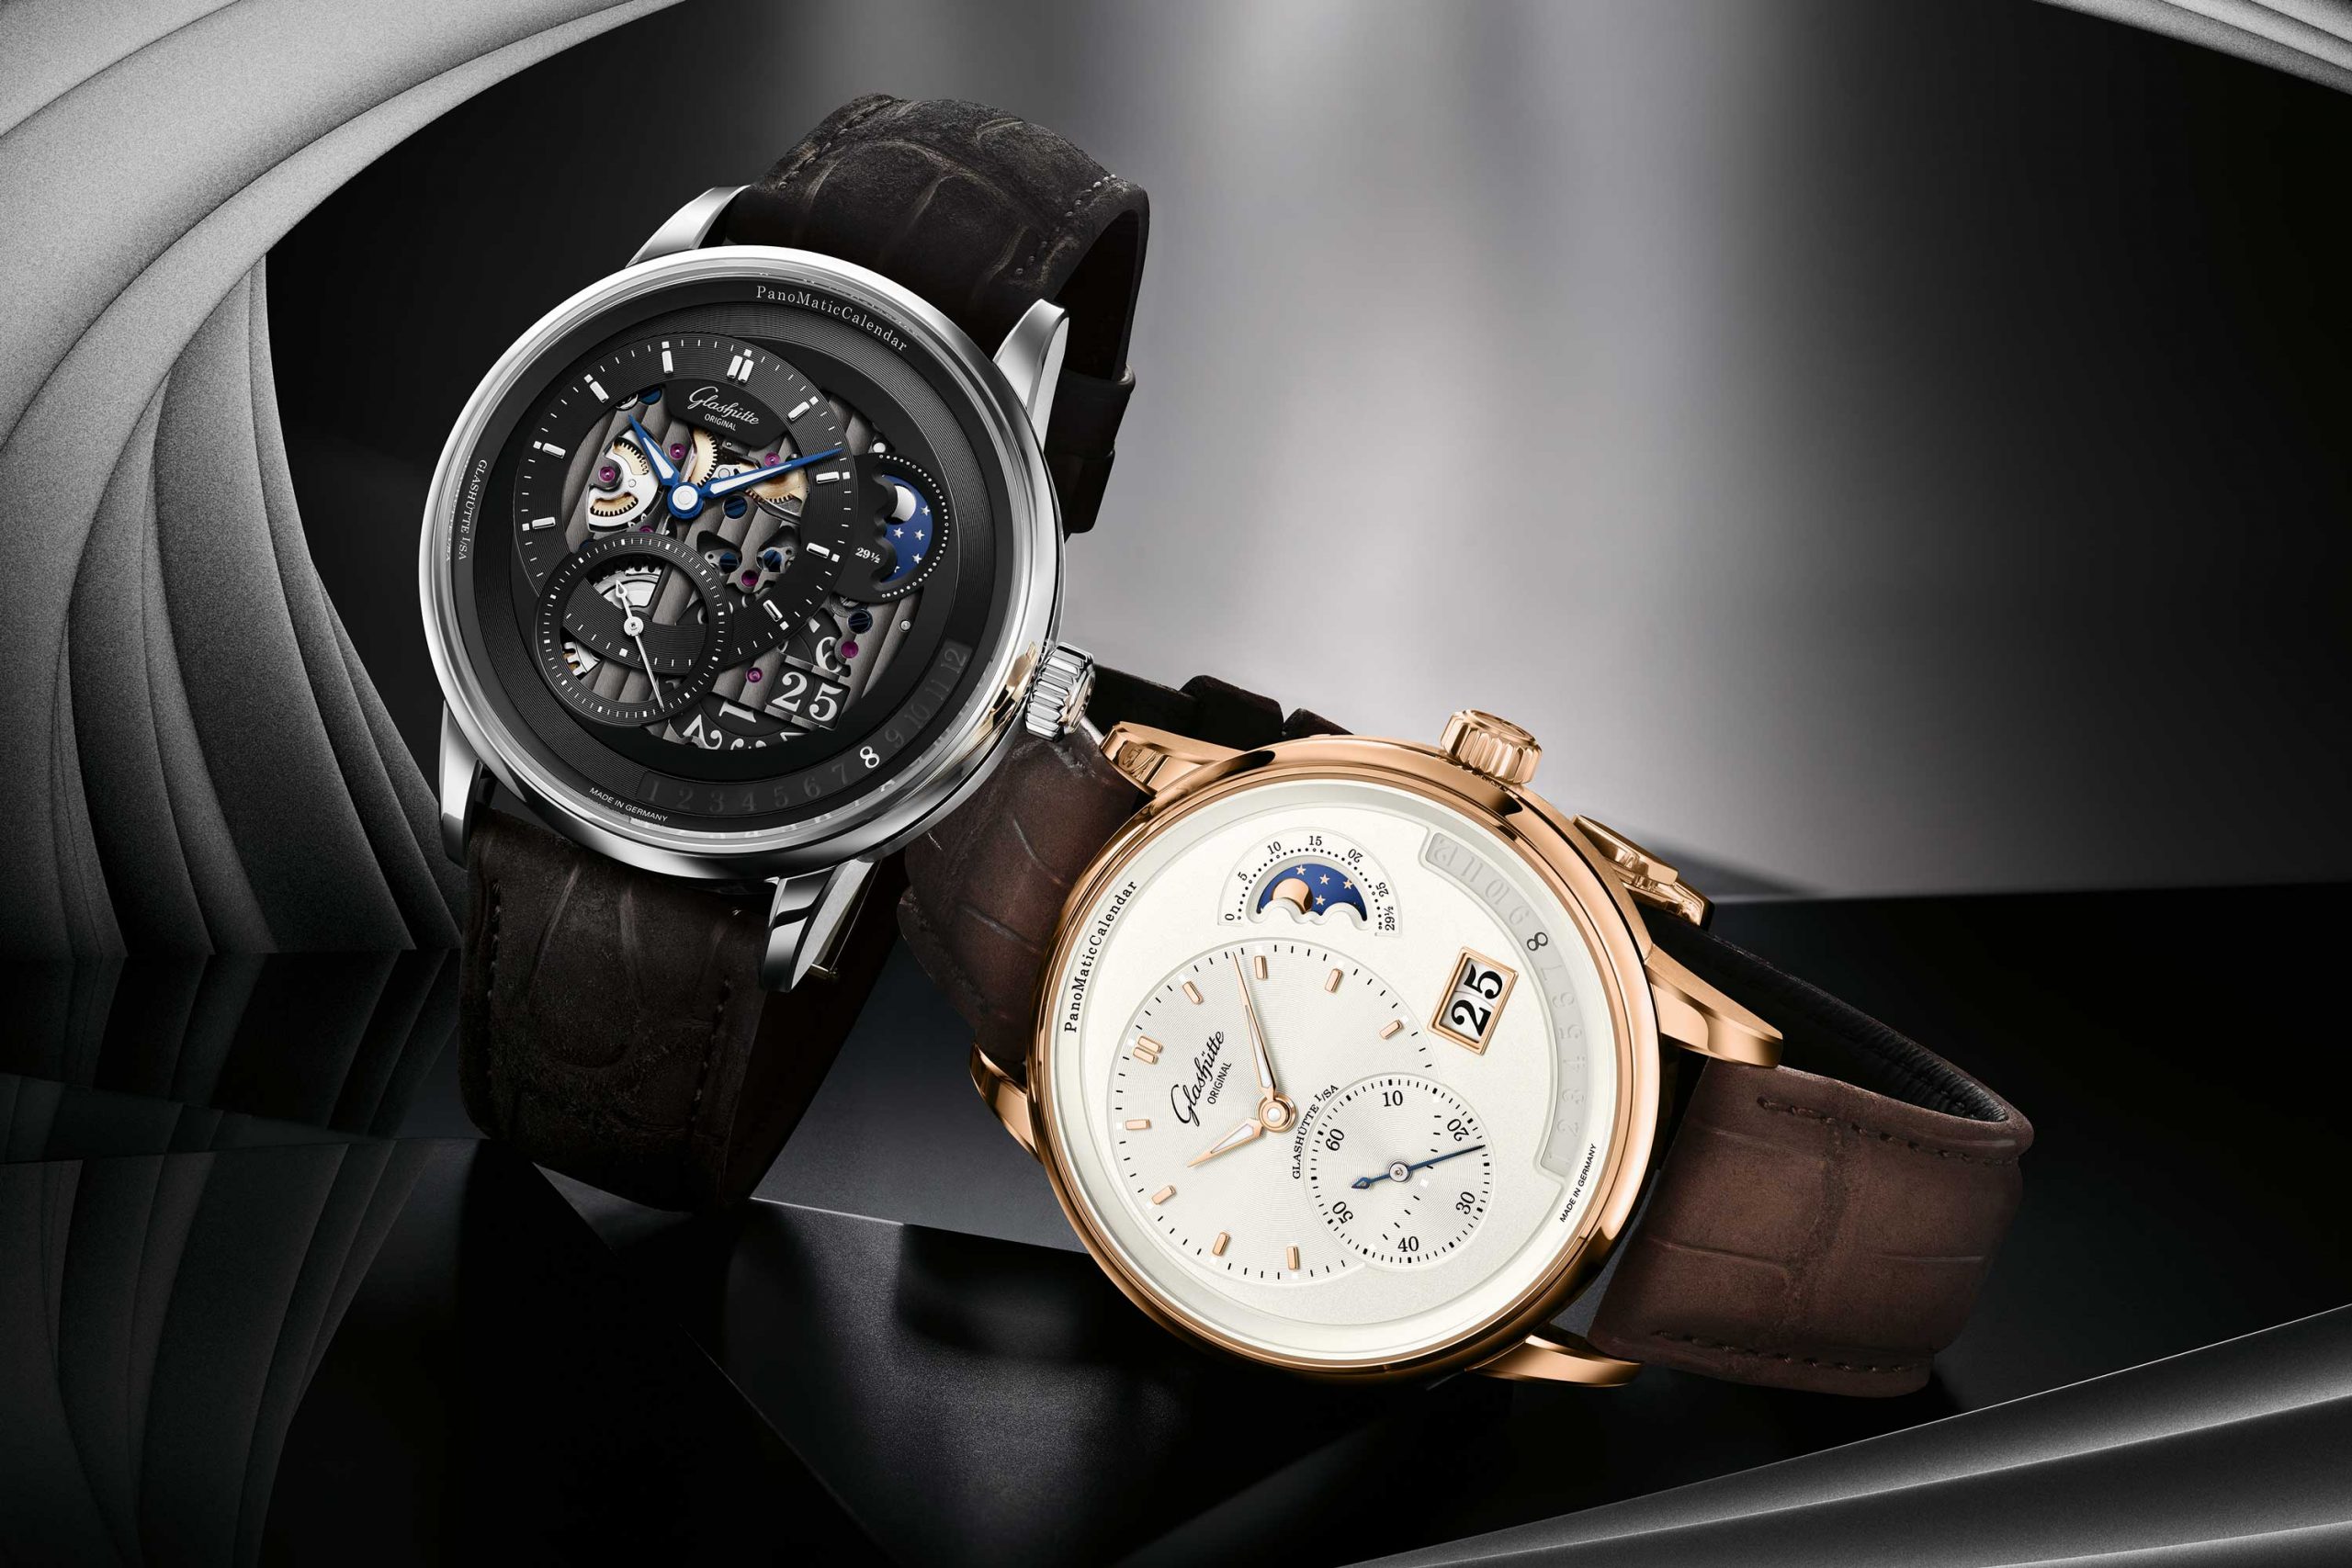 Glashütte Original PanoMaticCalendar in red gold and in platinum. The red gold model exudes classic grace and elegance while the limited edition platinum shows the caliber’s edgier, more modern side